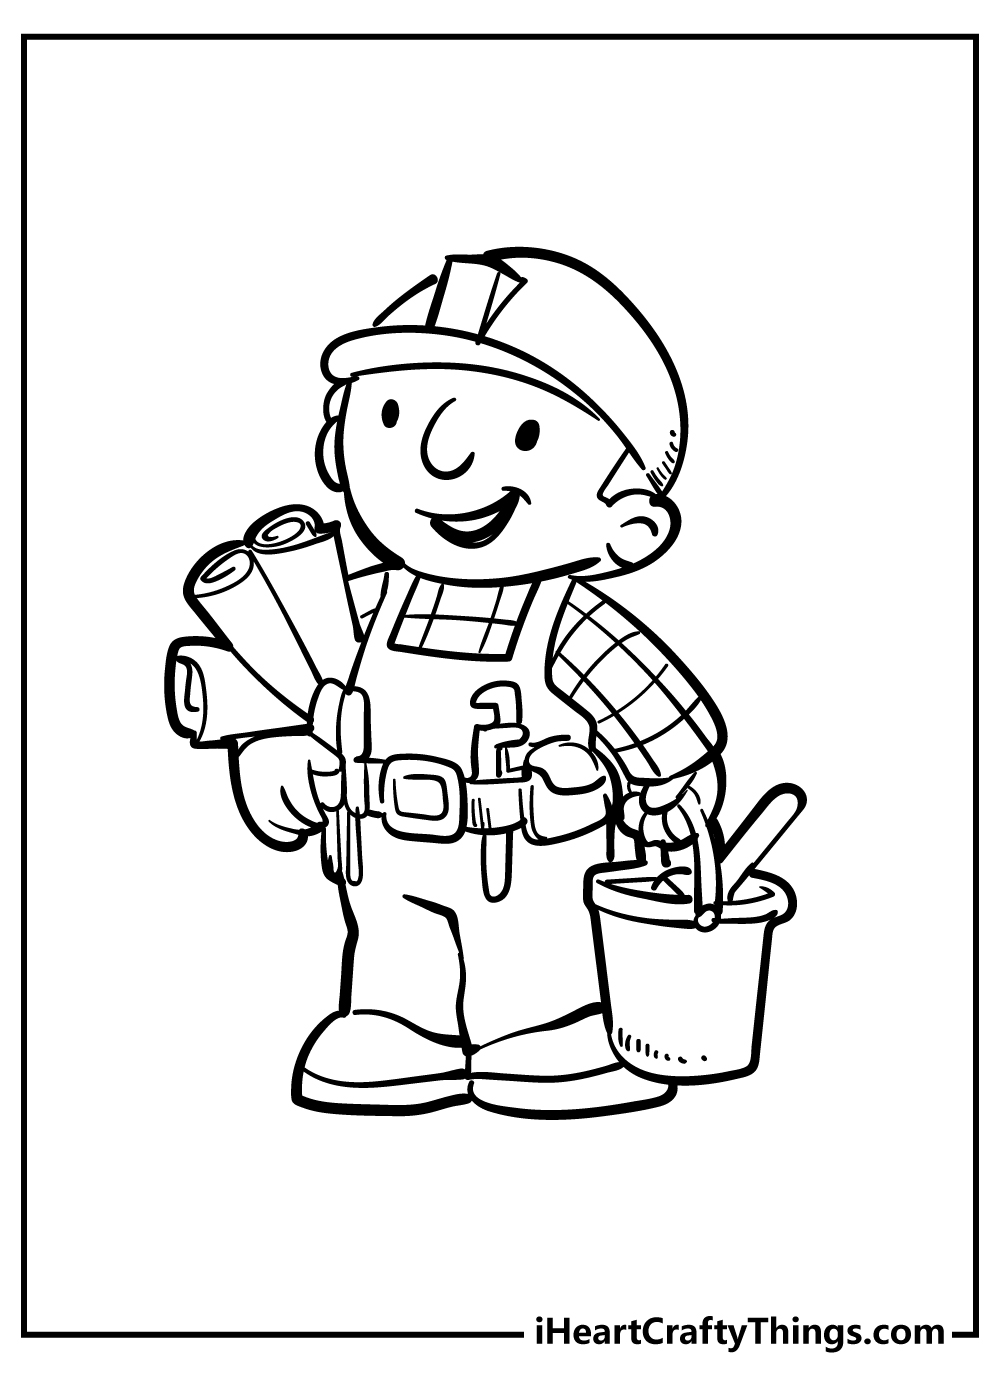 Bob the Builder Coloring Pages for adults free printable